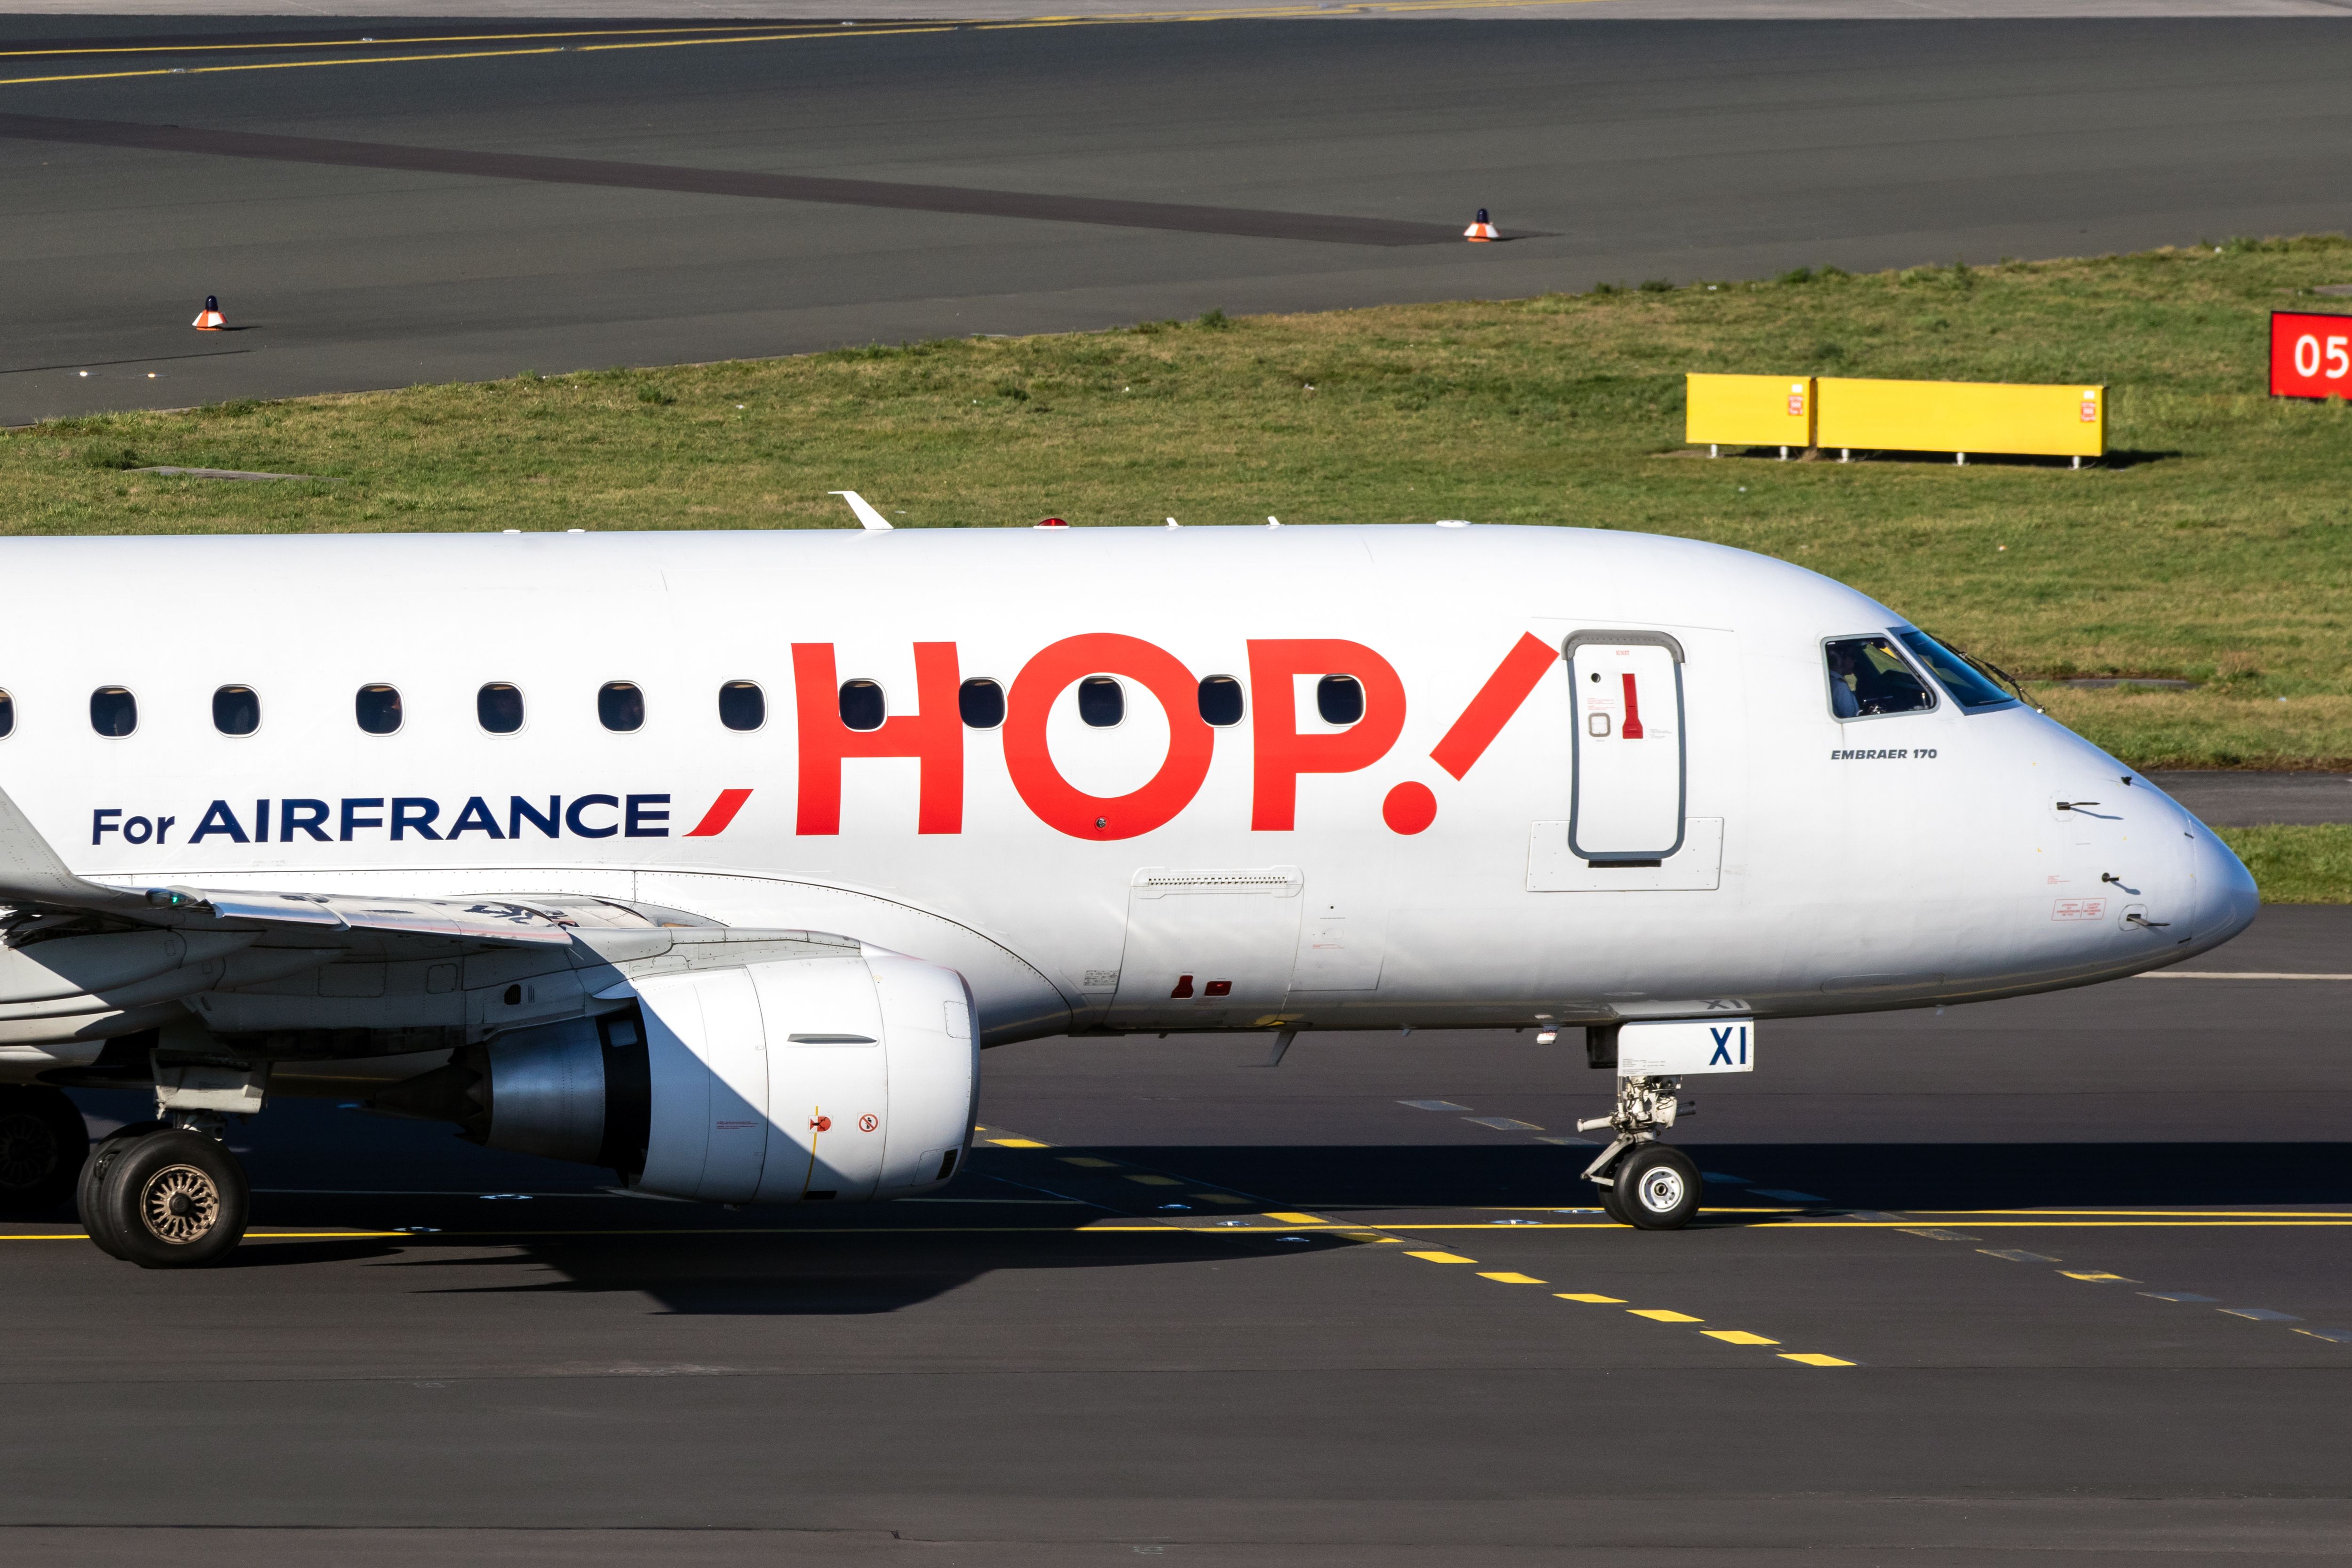 Air France Hop Embraer E170STD passenger plane taxiing after landing at Dusseldorf Airport